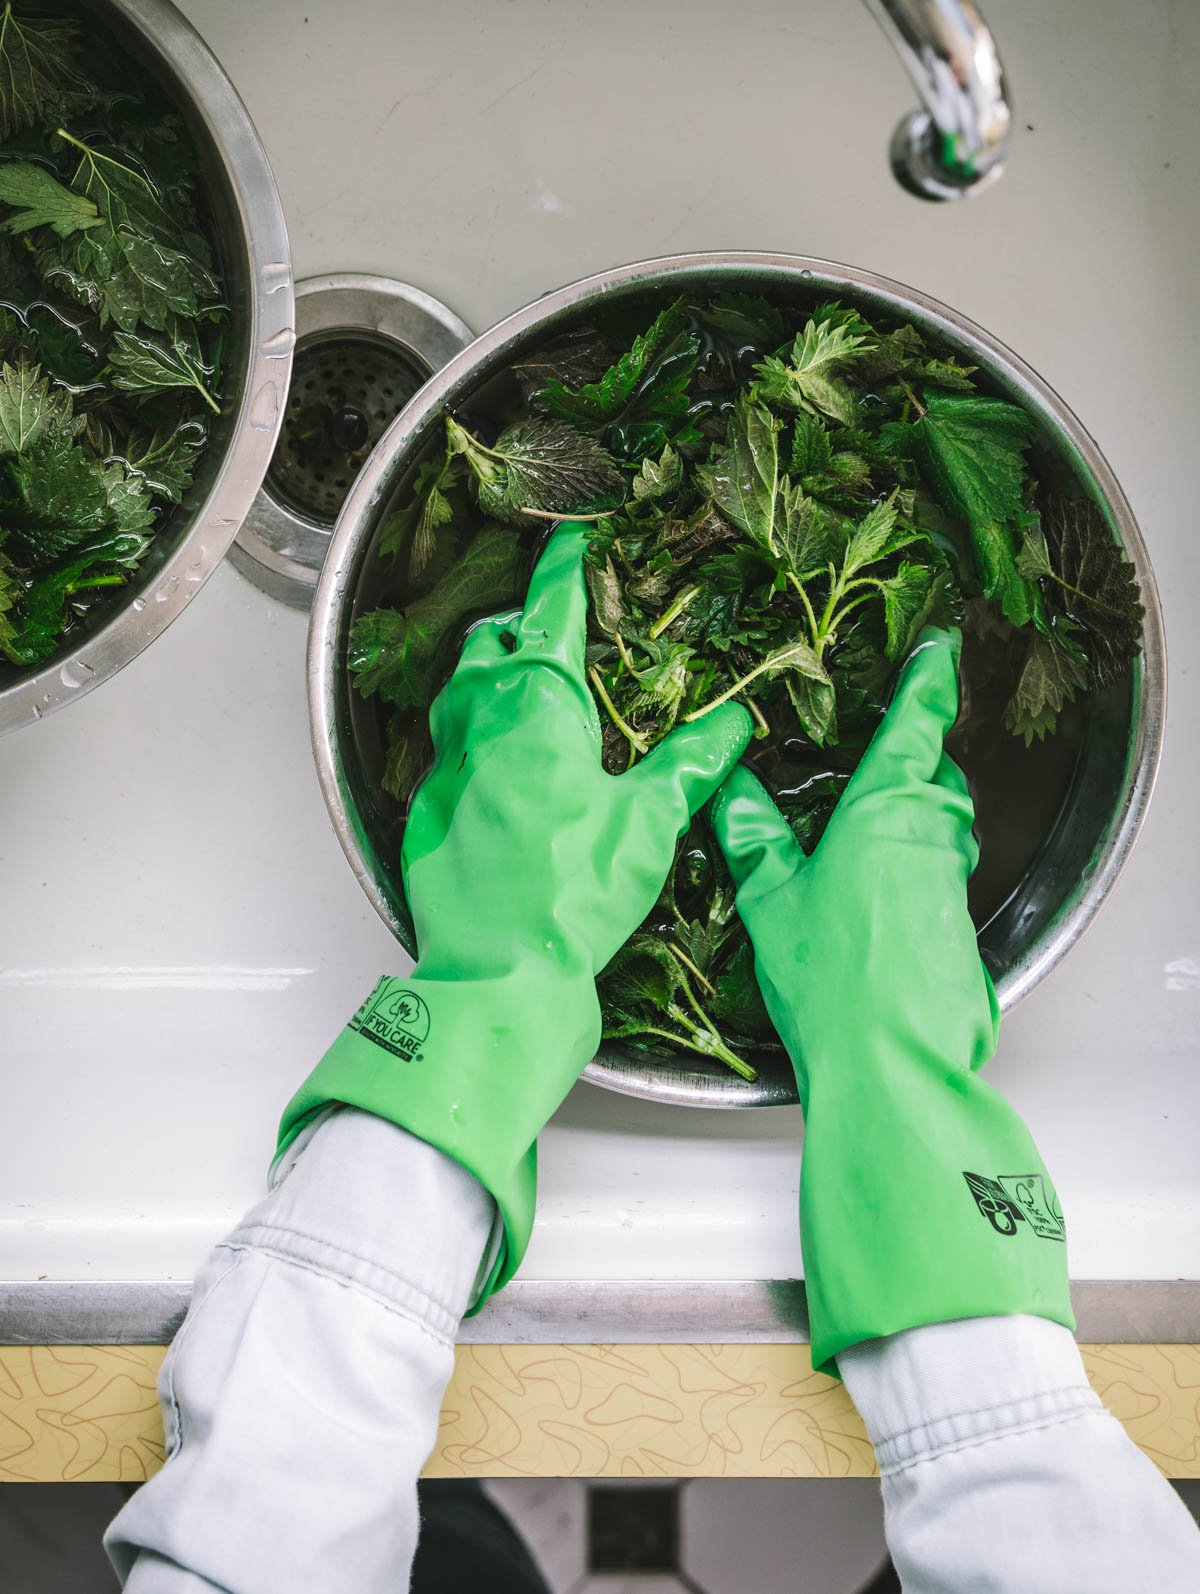 Washing stinging nettles in a bowl in the sink.